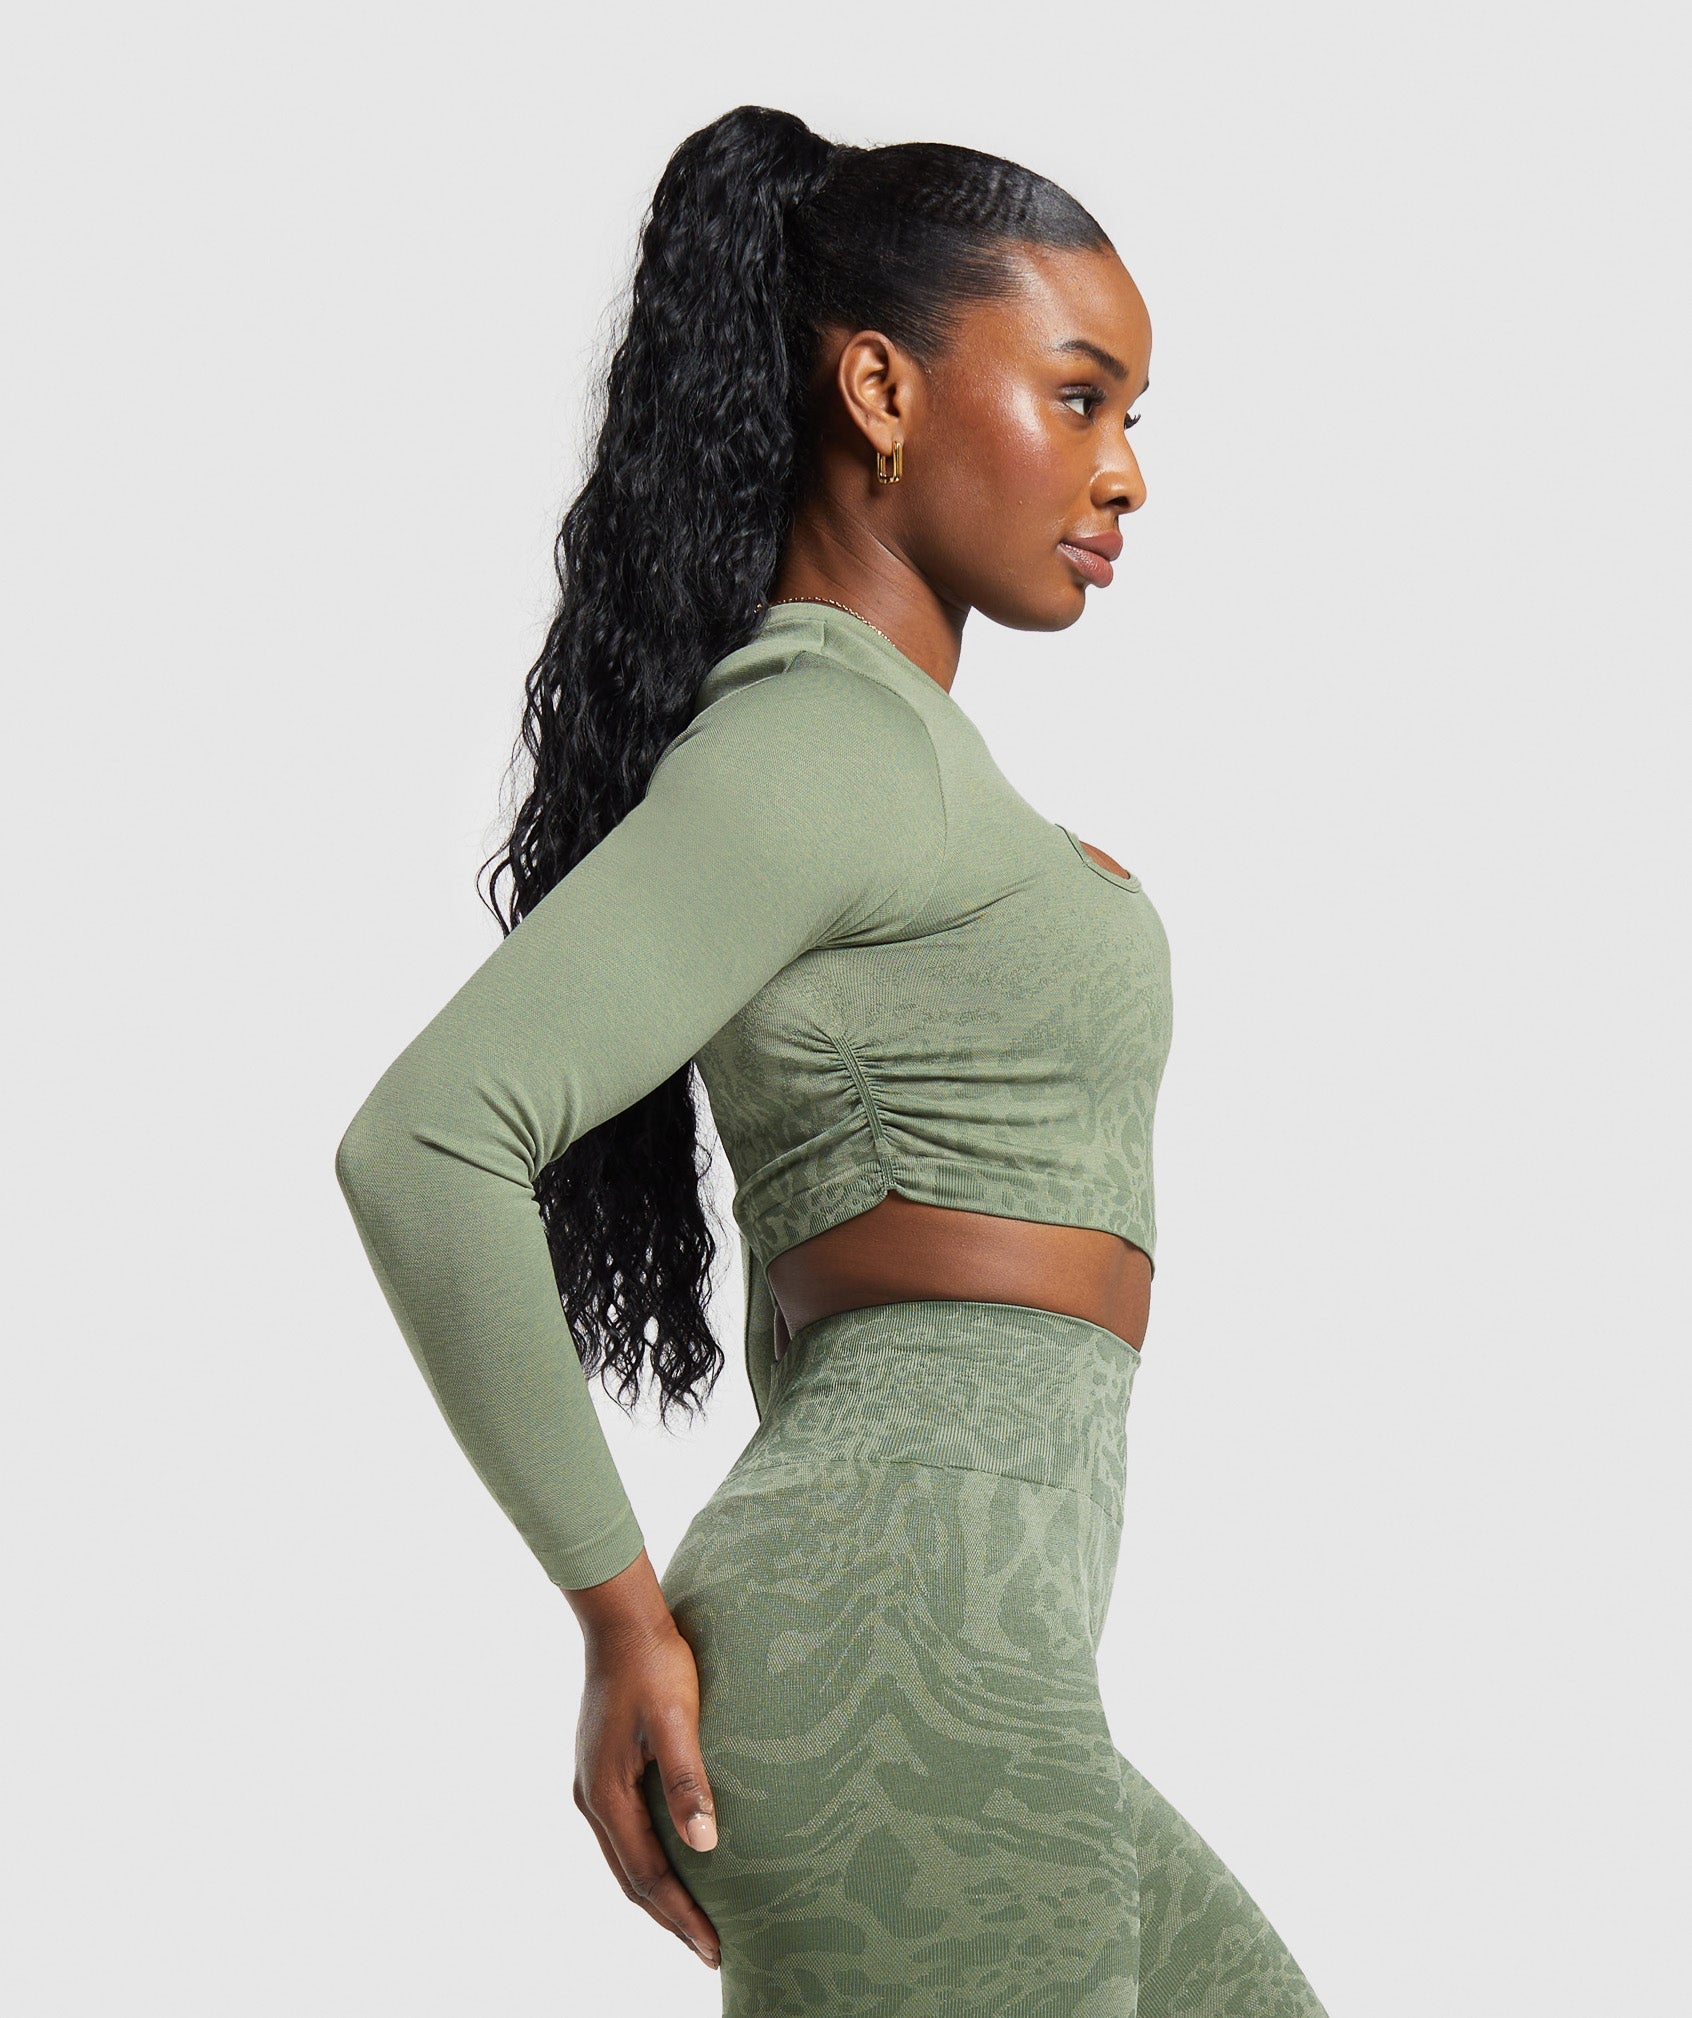 Long Sleeve Burnout Seamless Set Gymshark DUPES 2 Piece Gym Sets - Wom –  Mommin' Out & More